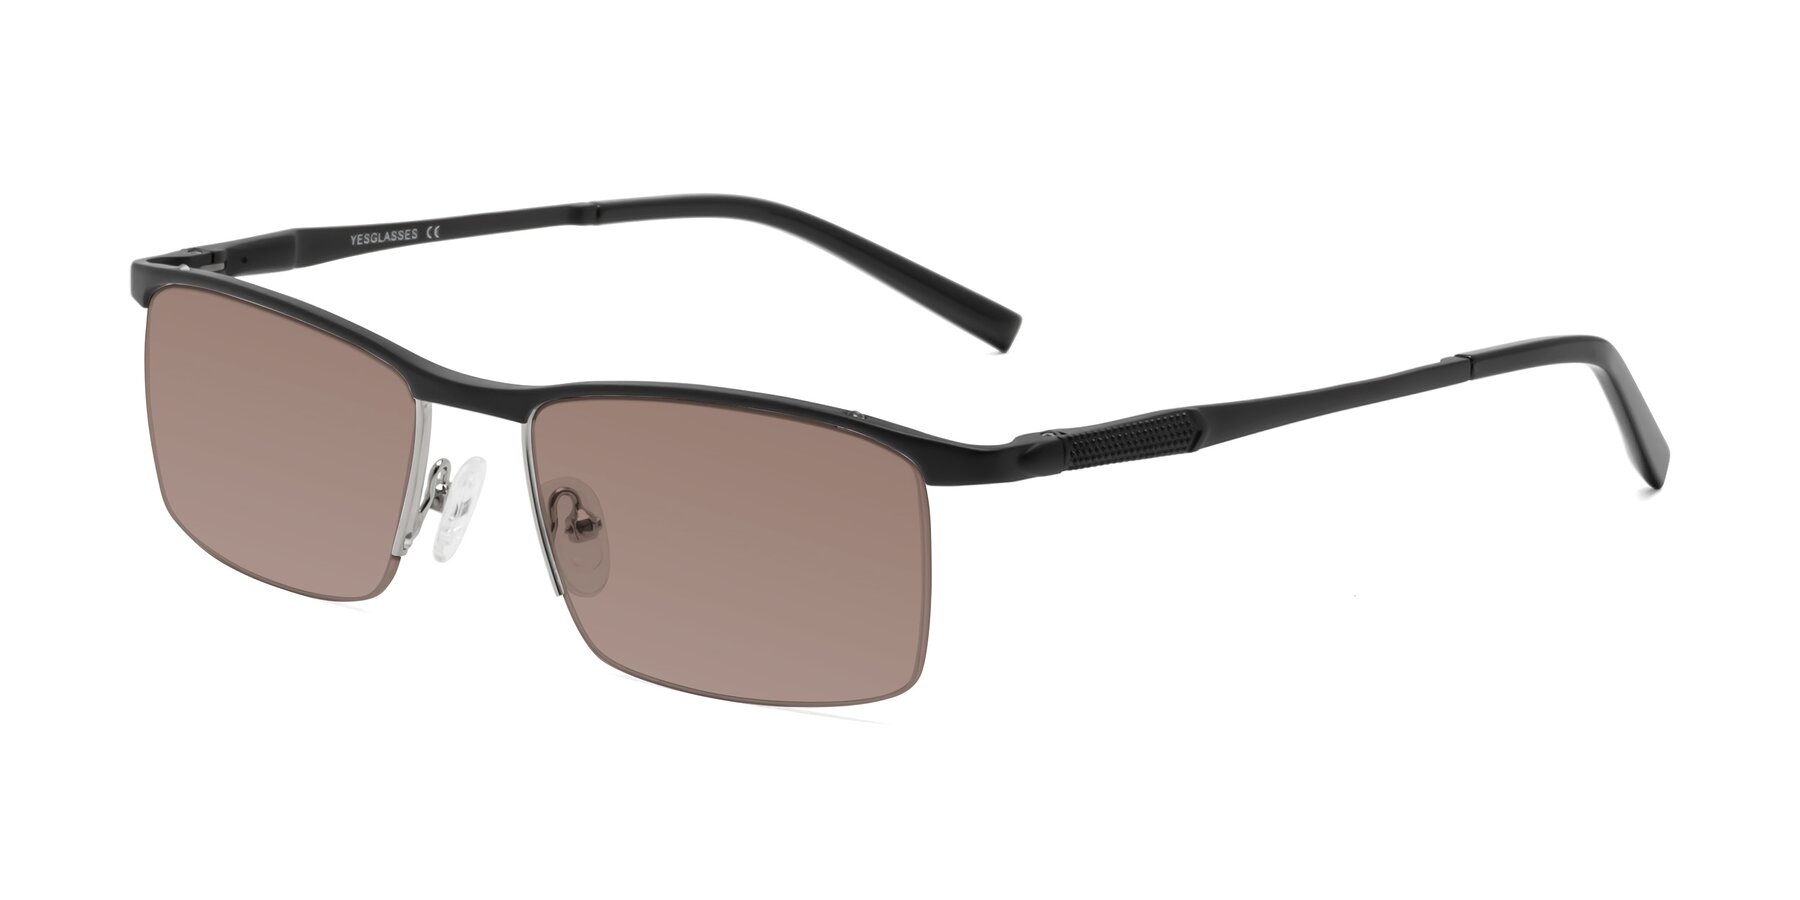 Angle of CX6303 in Black with Medium Brown Tinted Lenses